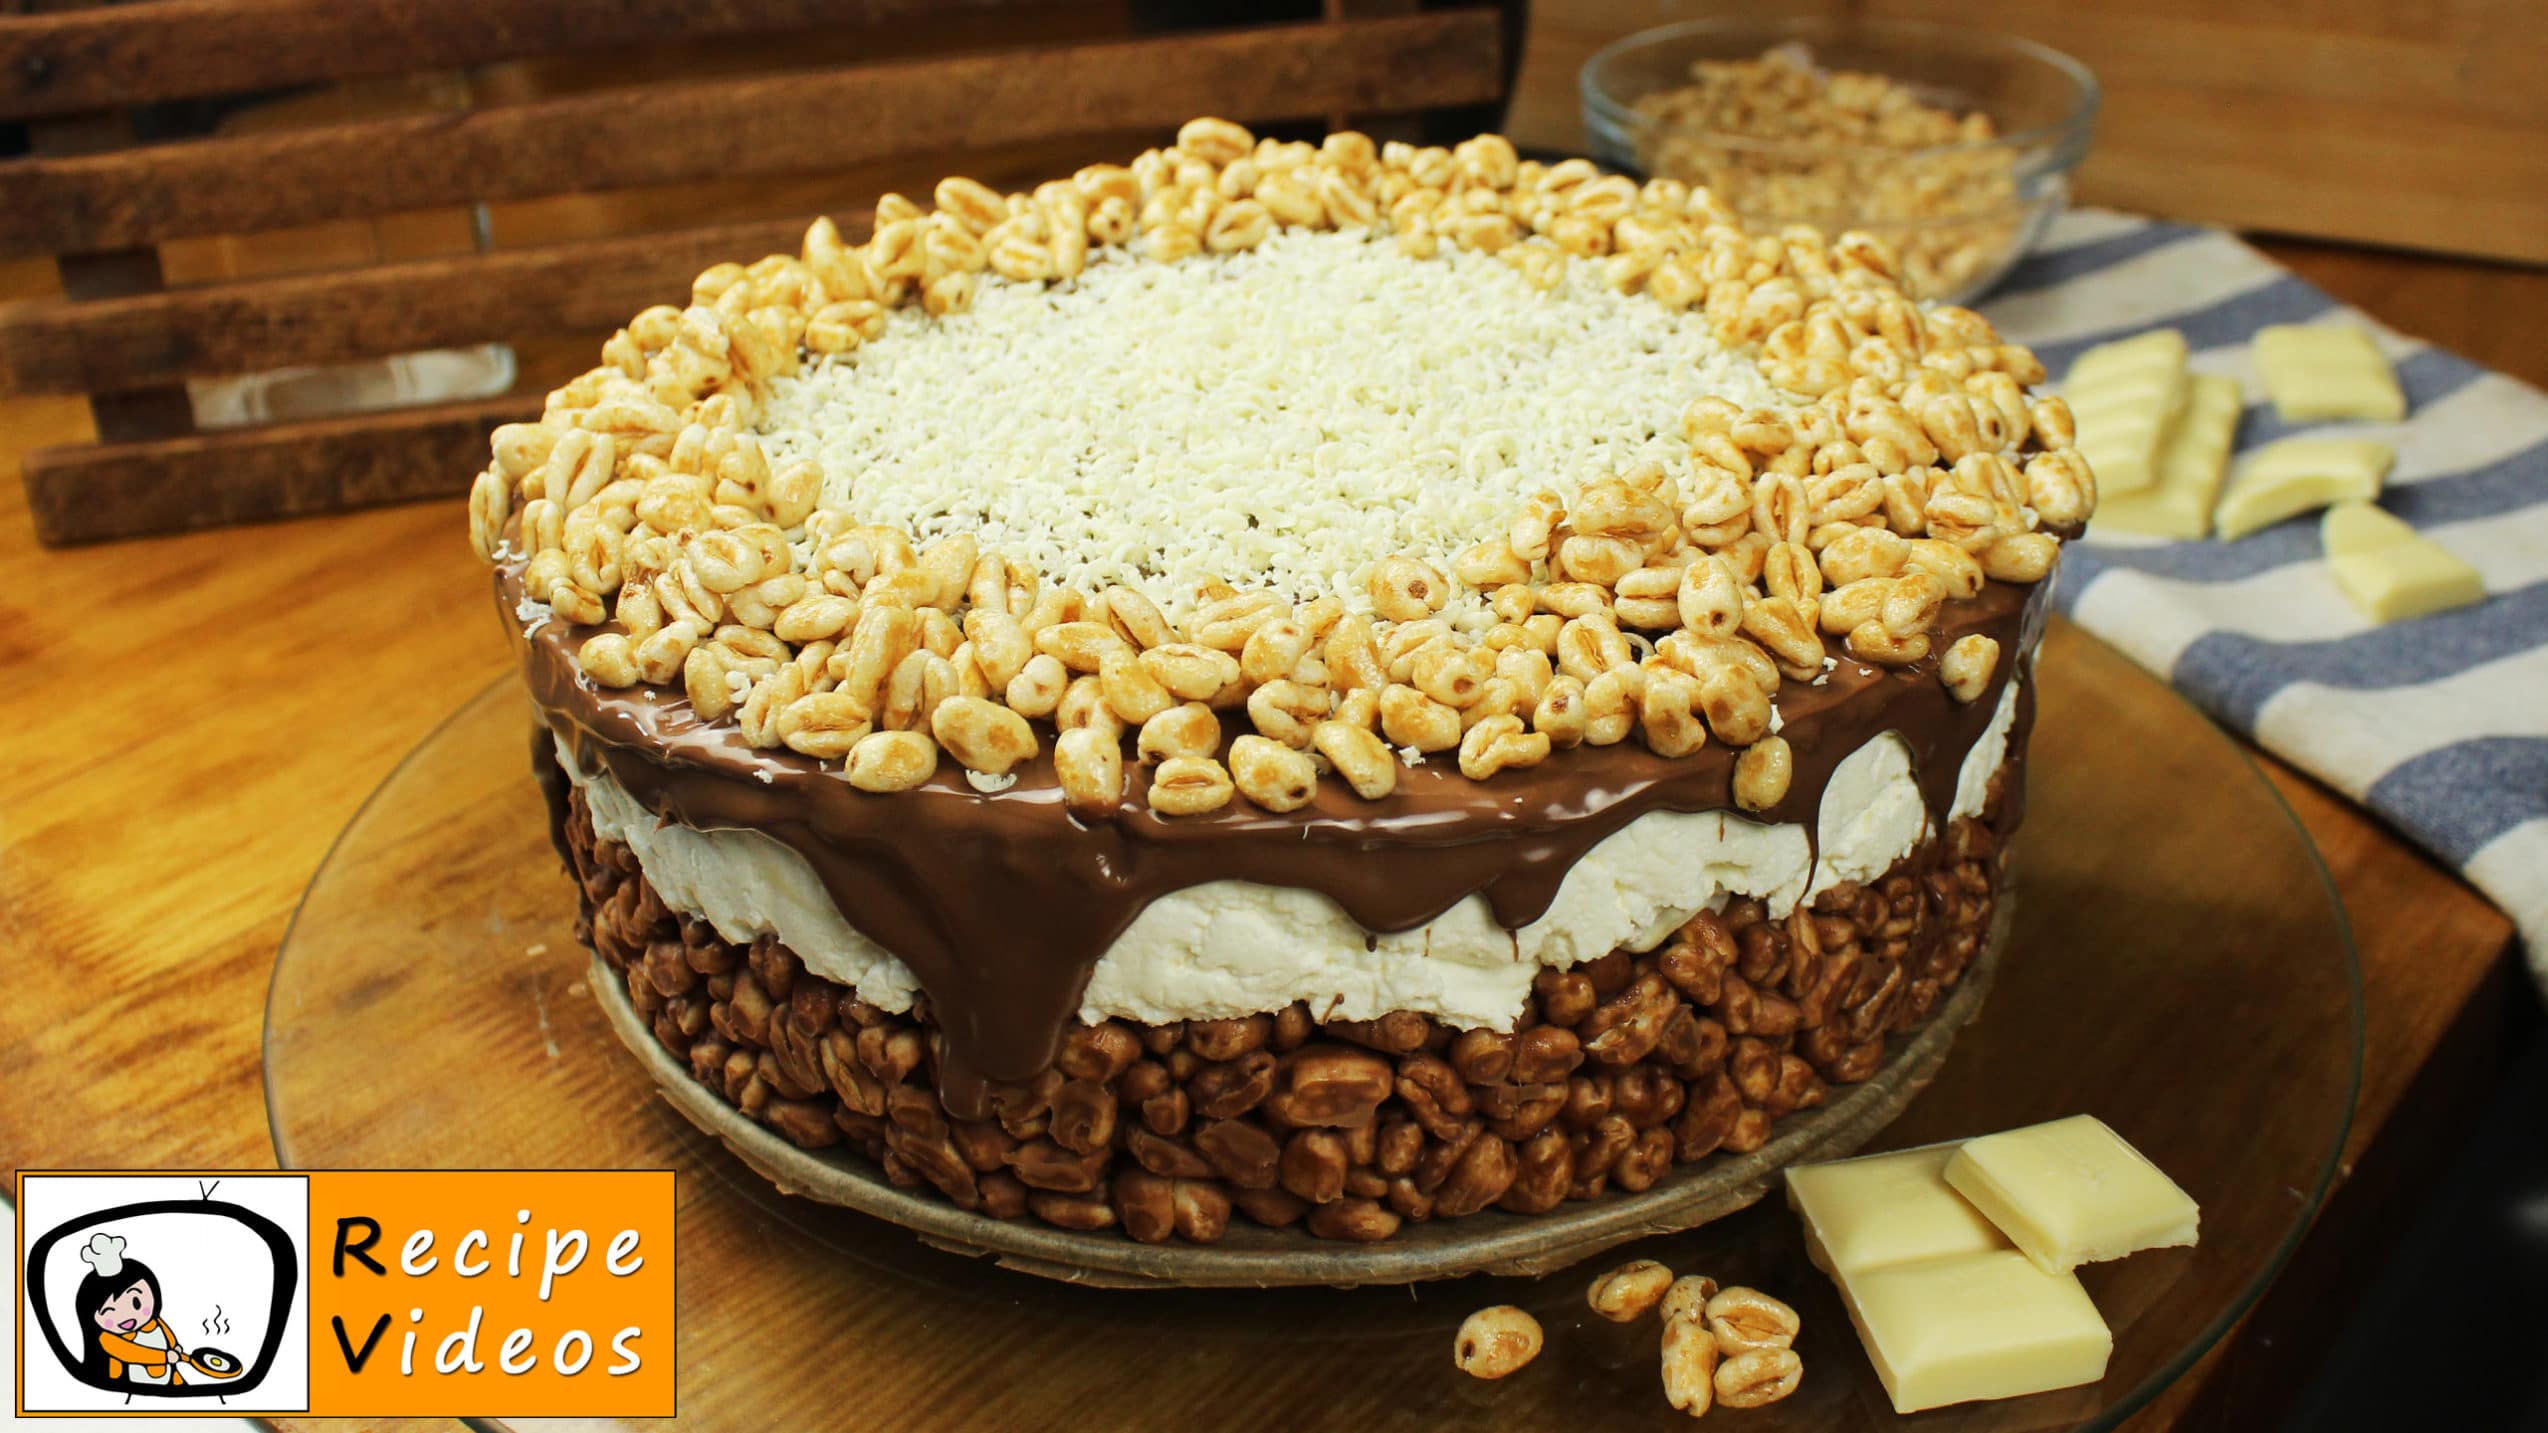 KINDER COUNTRY CAKE RECIPE VIDEO - Kinder Country Cake